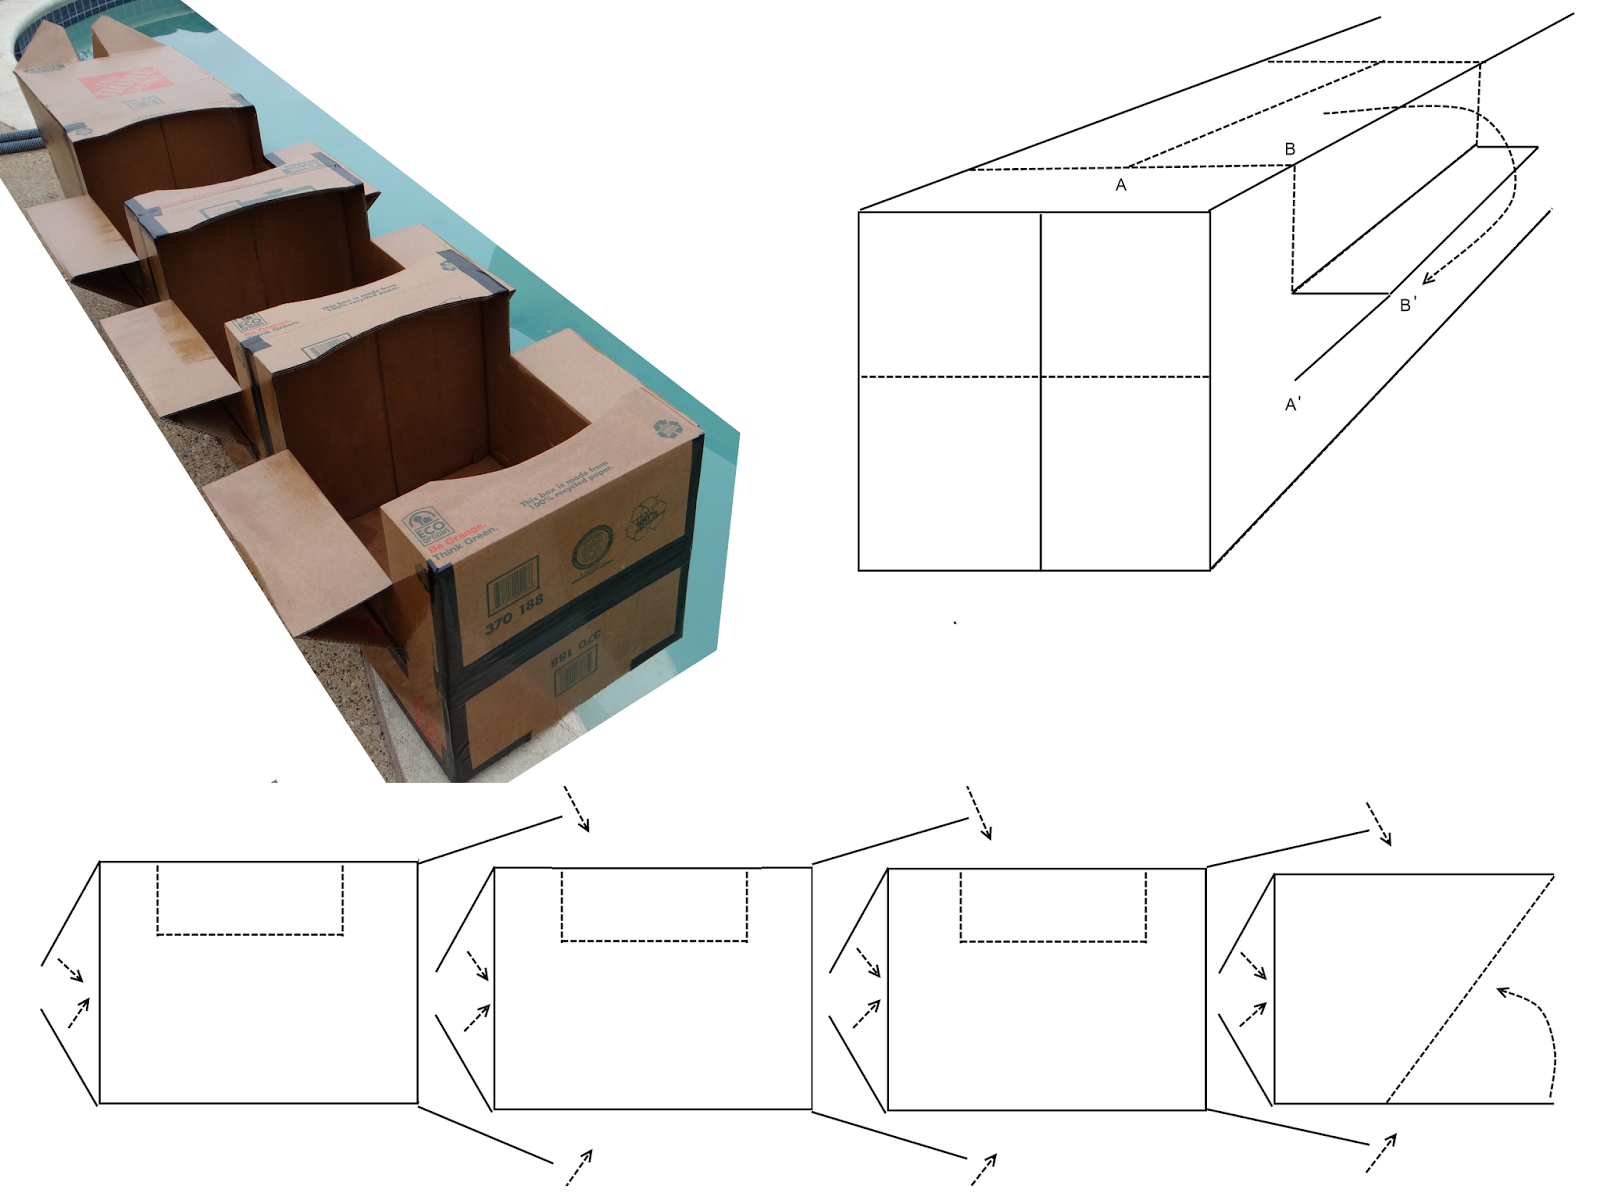 Student and Class Conversations: Perfect Cardboard Boat Design